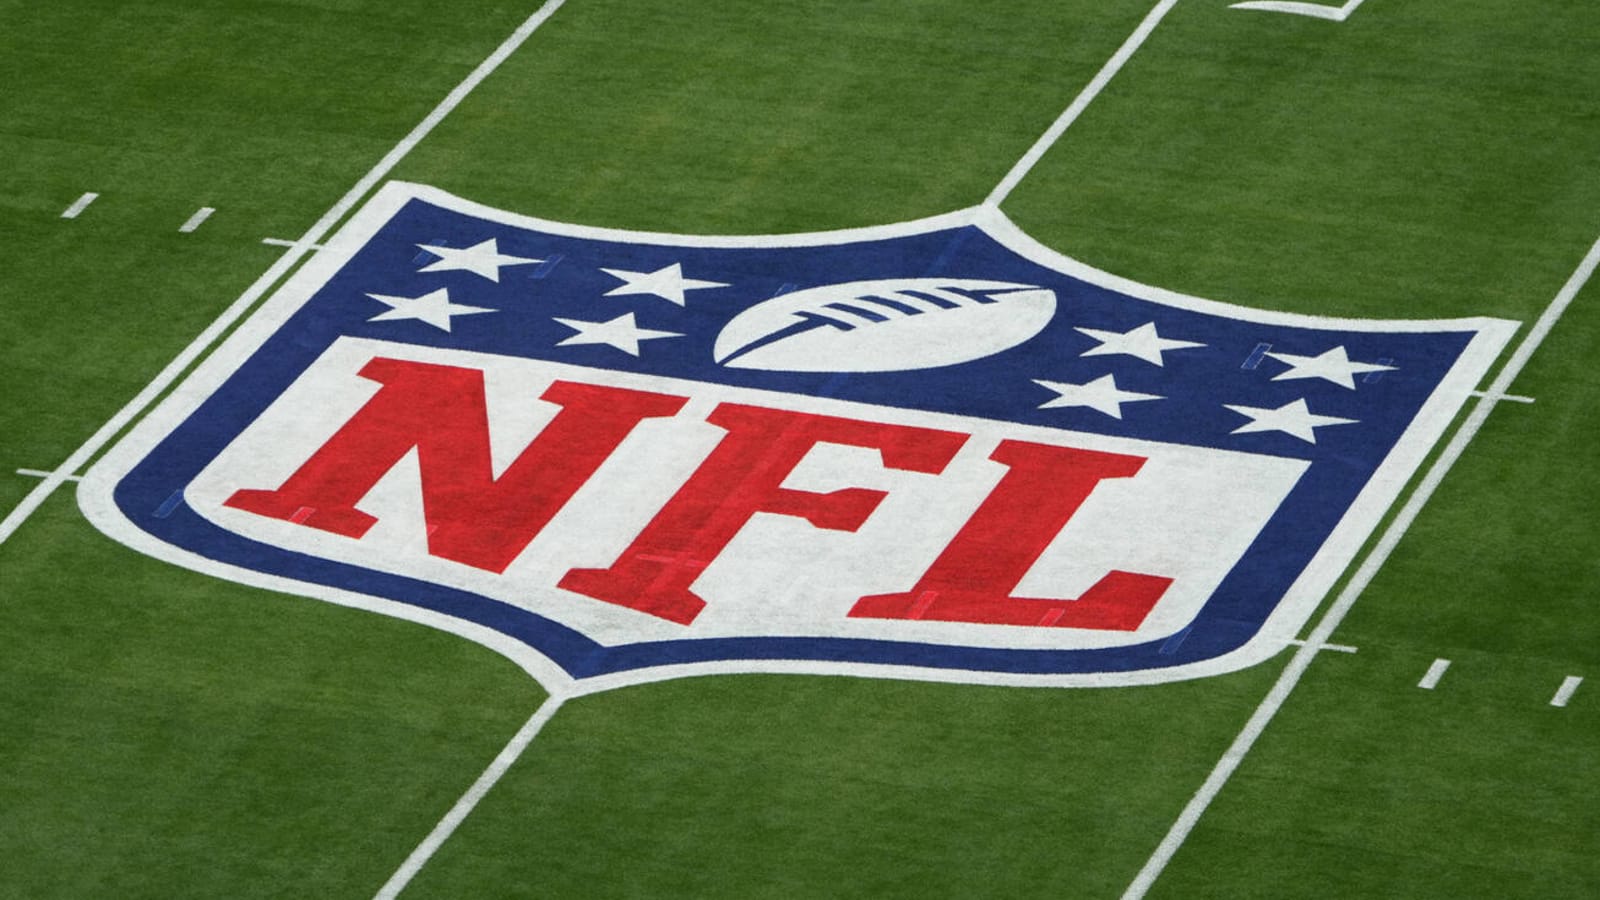 Peacock to exclusively stream NFL wildcard playoff game in January